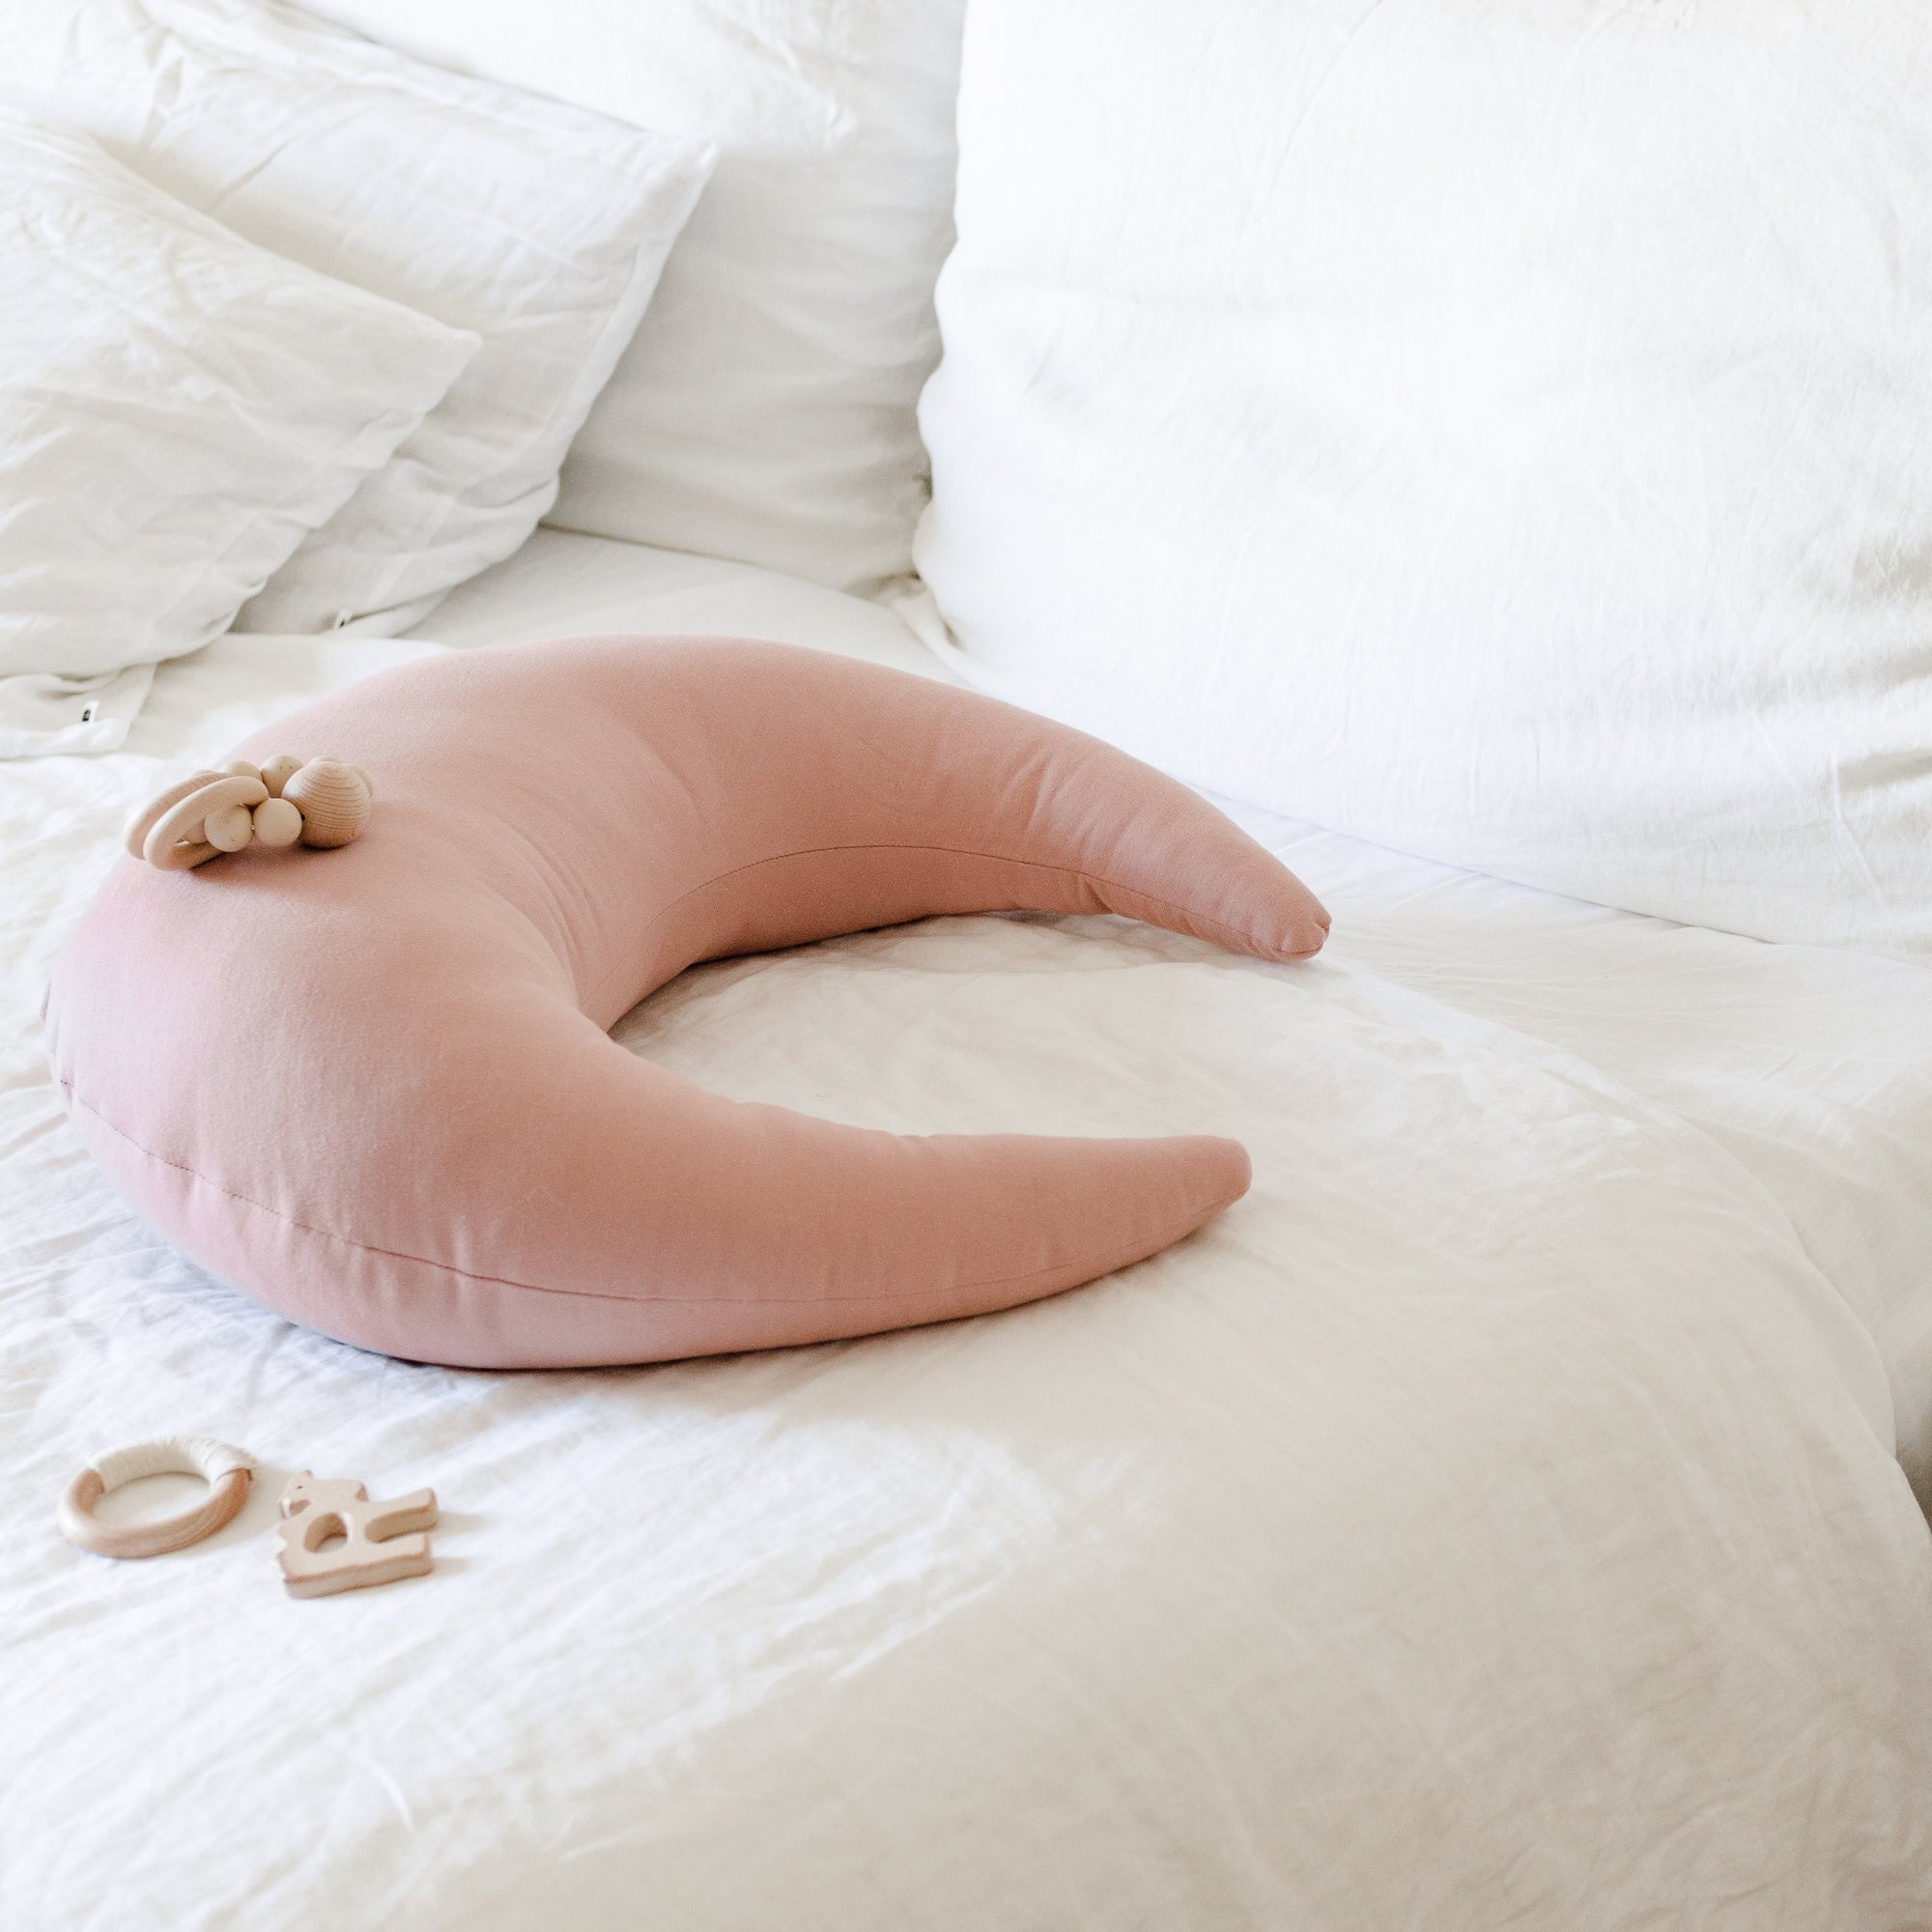 A crescent-shaped Feeding & Support Pillow by Snuggle Me in the shade Gumdrop on a bed.